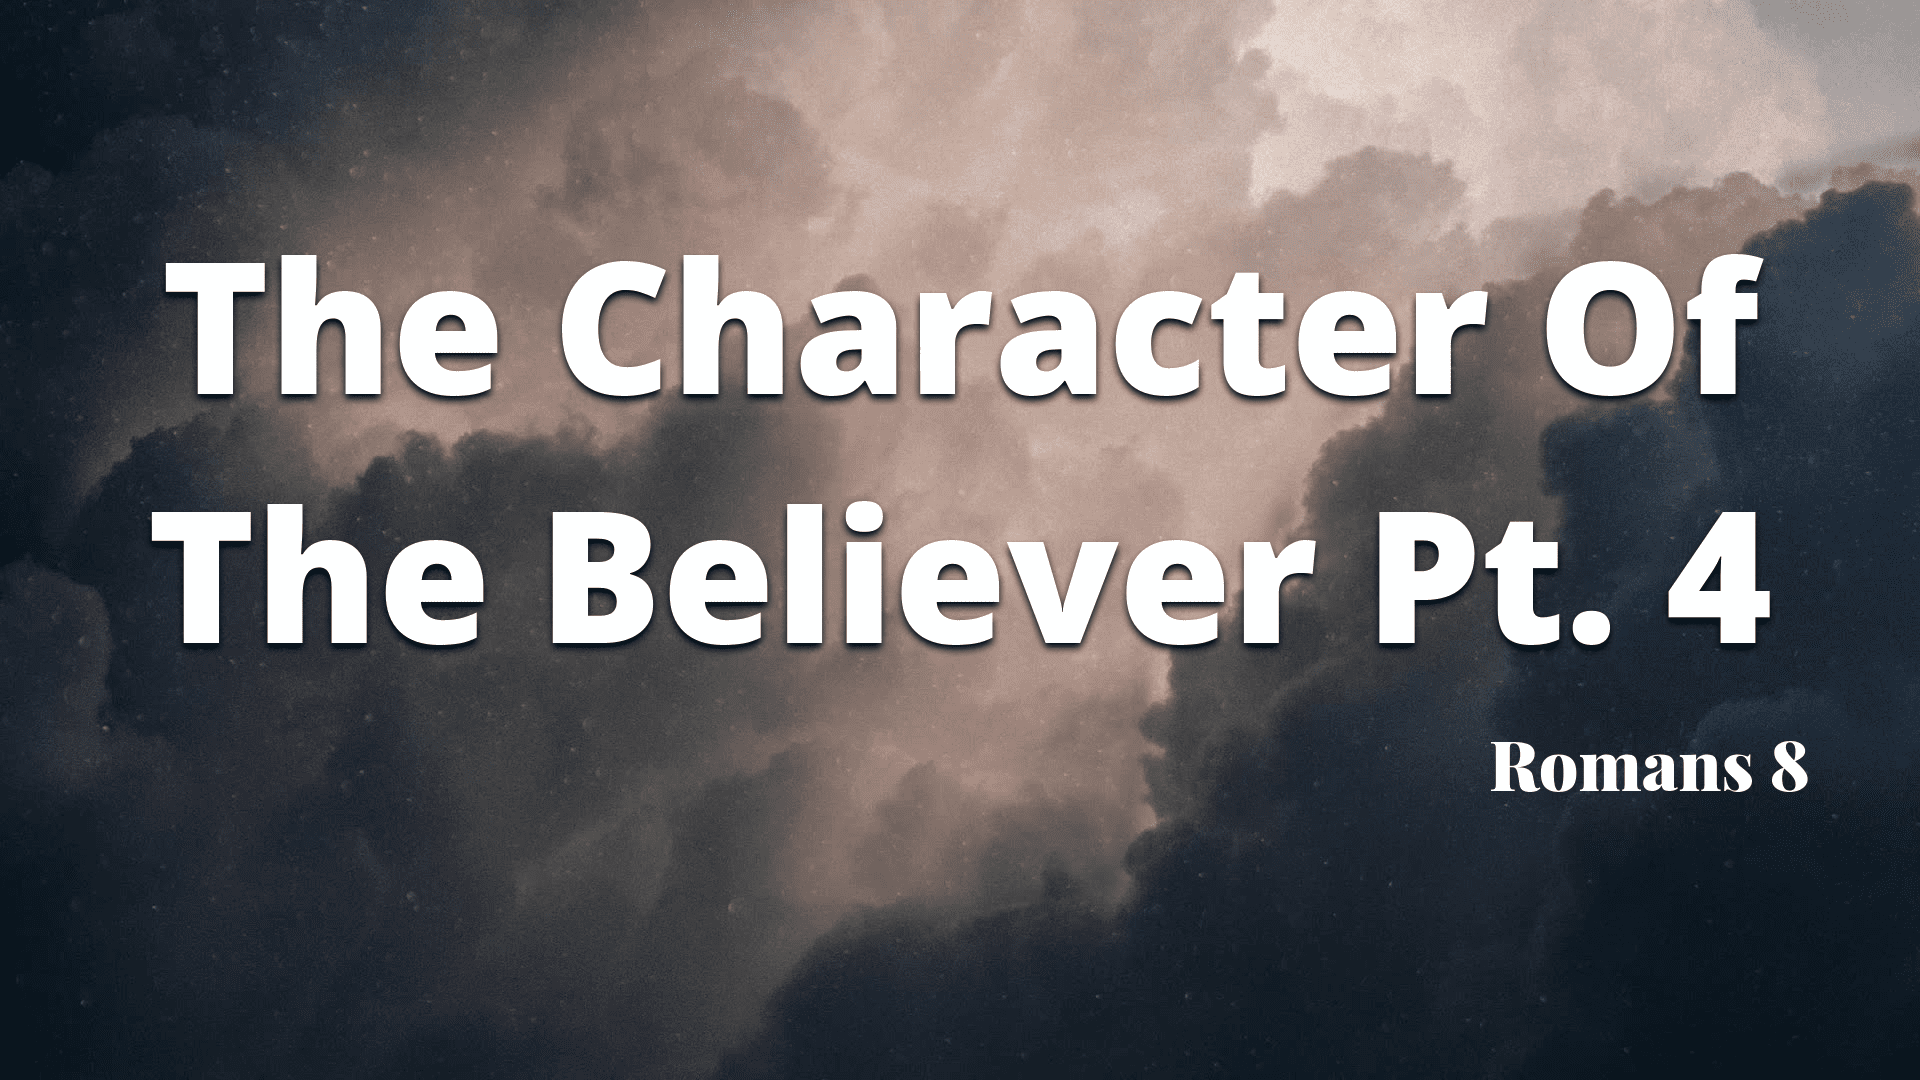 The Character Of The Believer Pt. 4